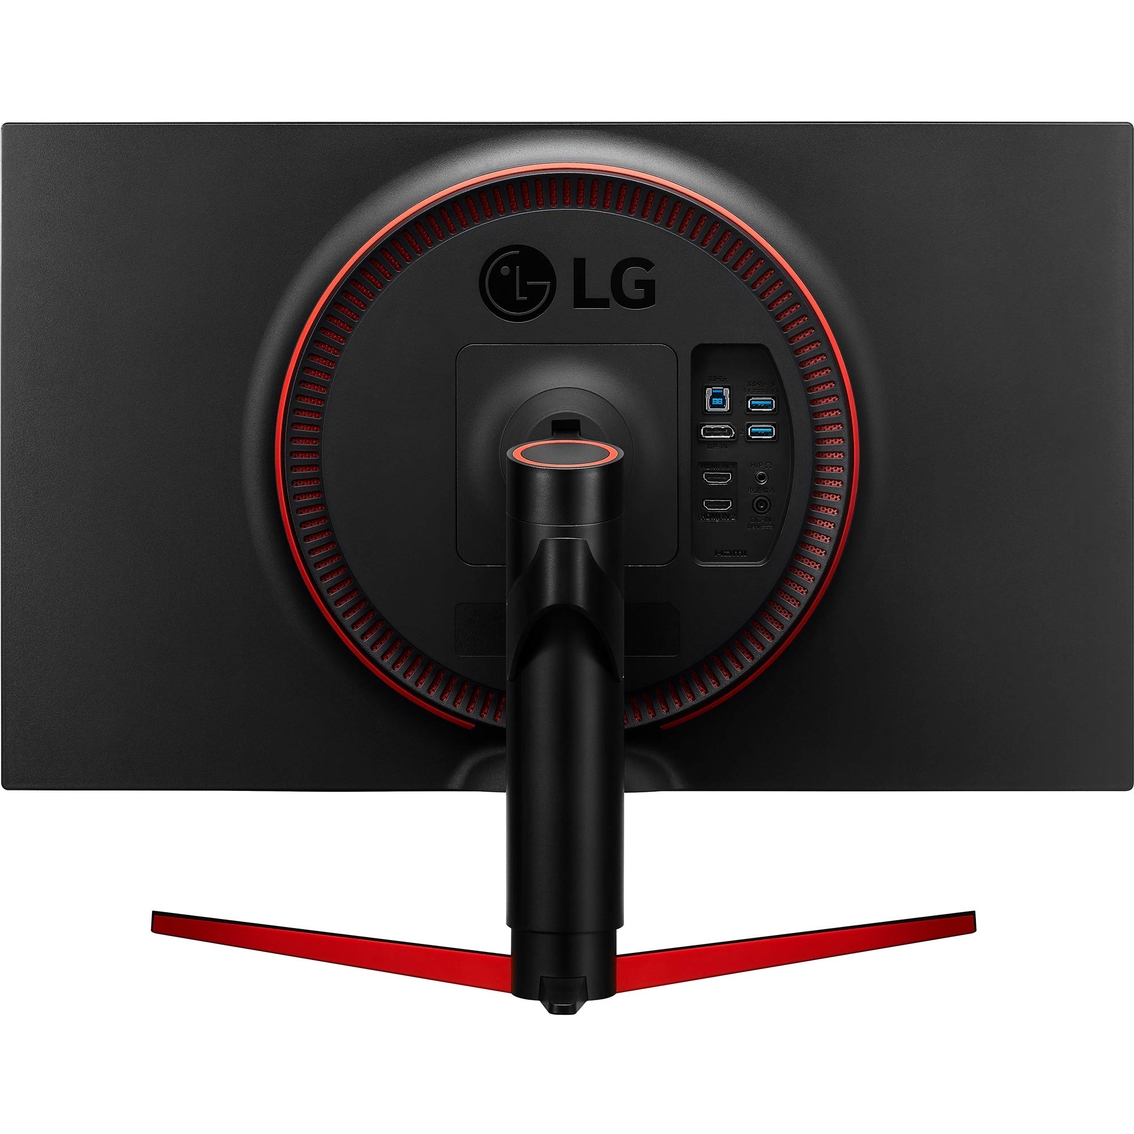 LG 27 in. 240Hz Gaming Monitor - Image 2 of 4